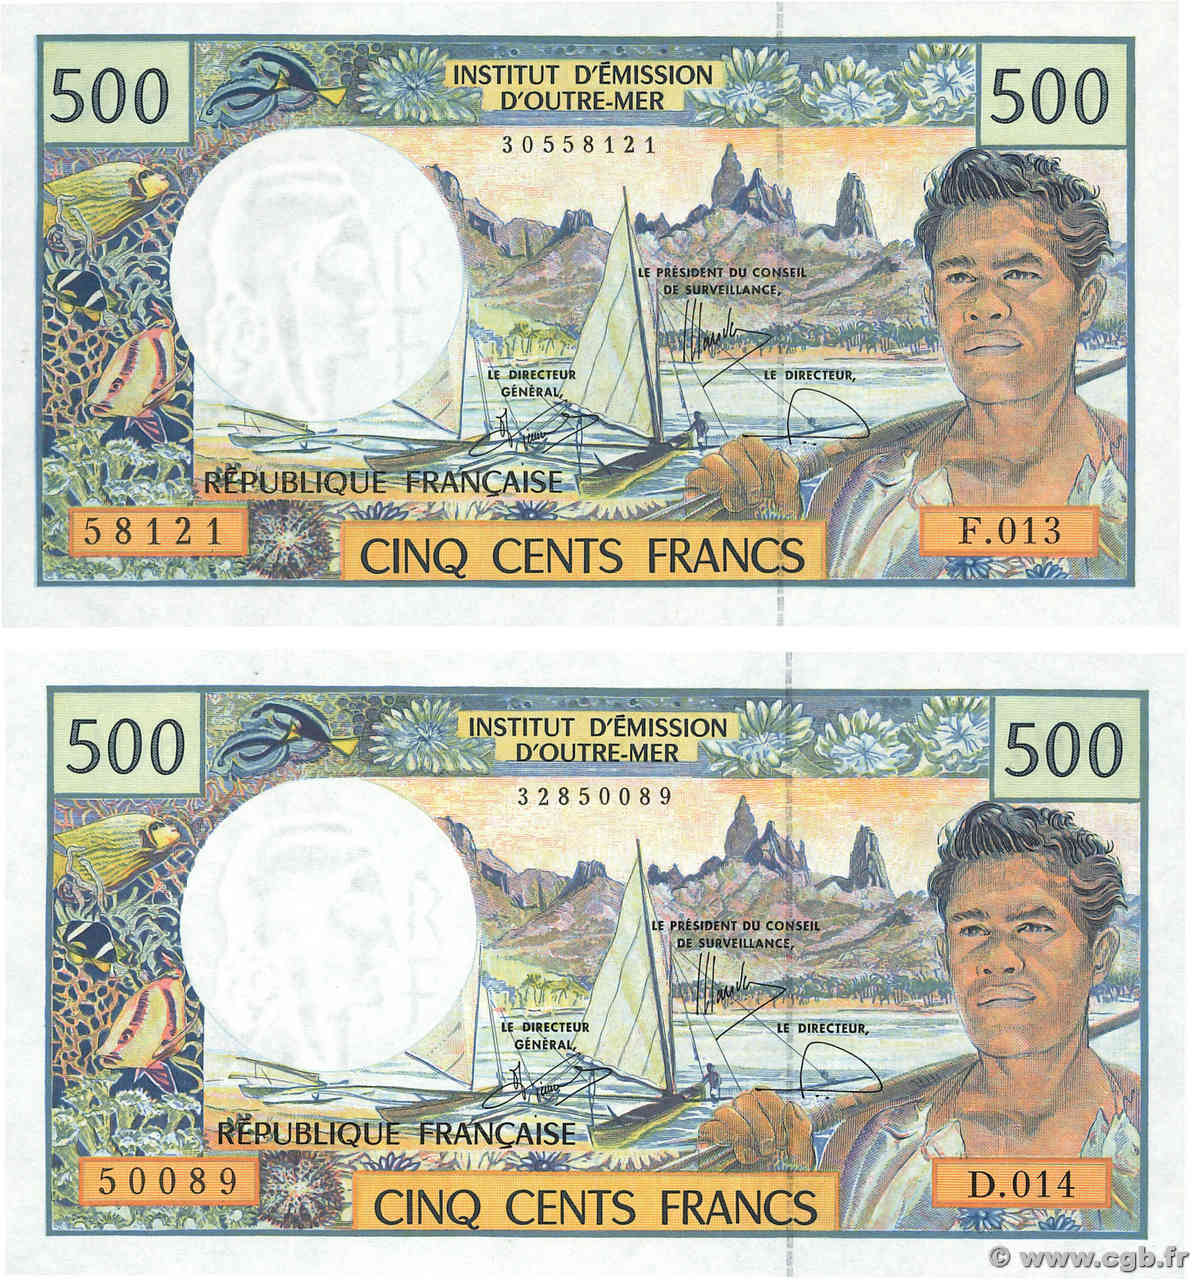 500 Francs Lot FRENCH PACIFIC TERRITORIES  2000 P.01f ST